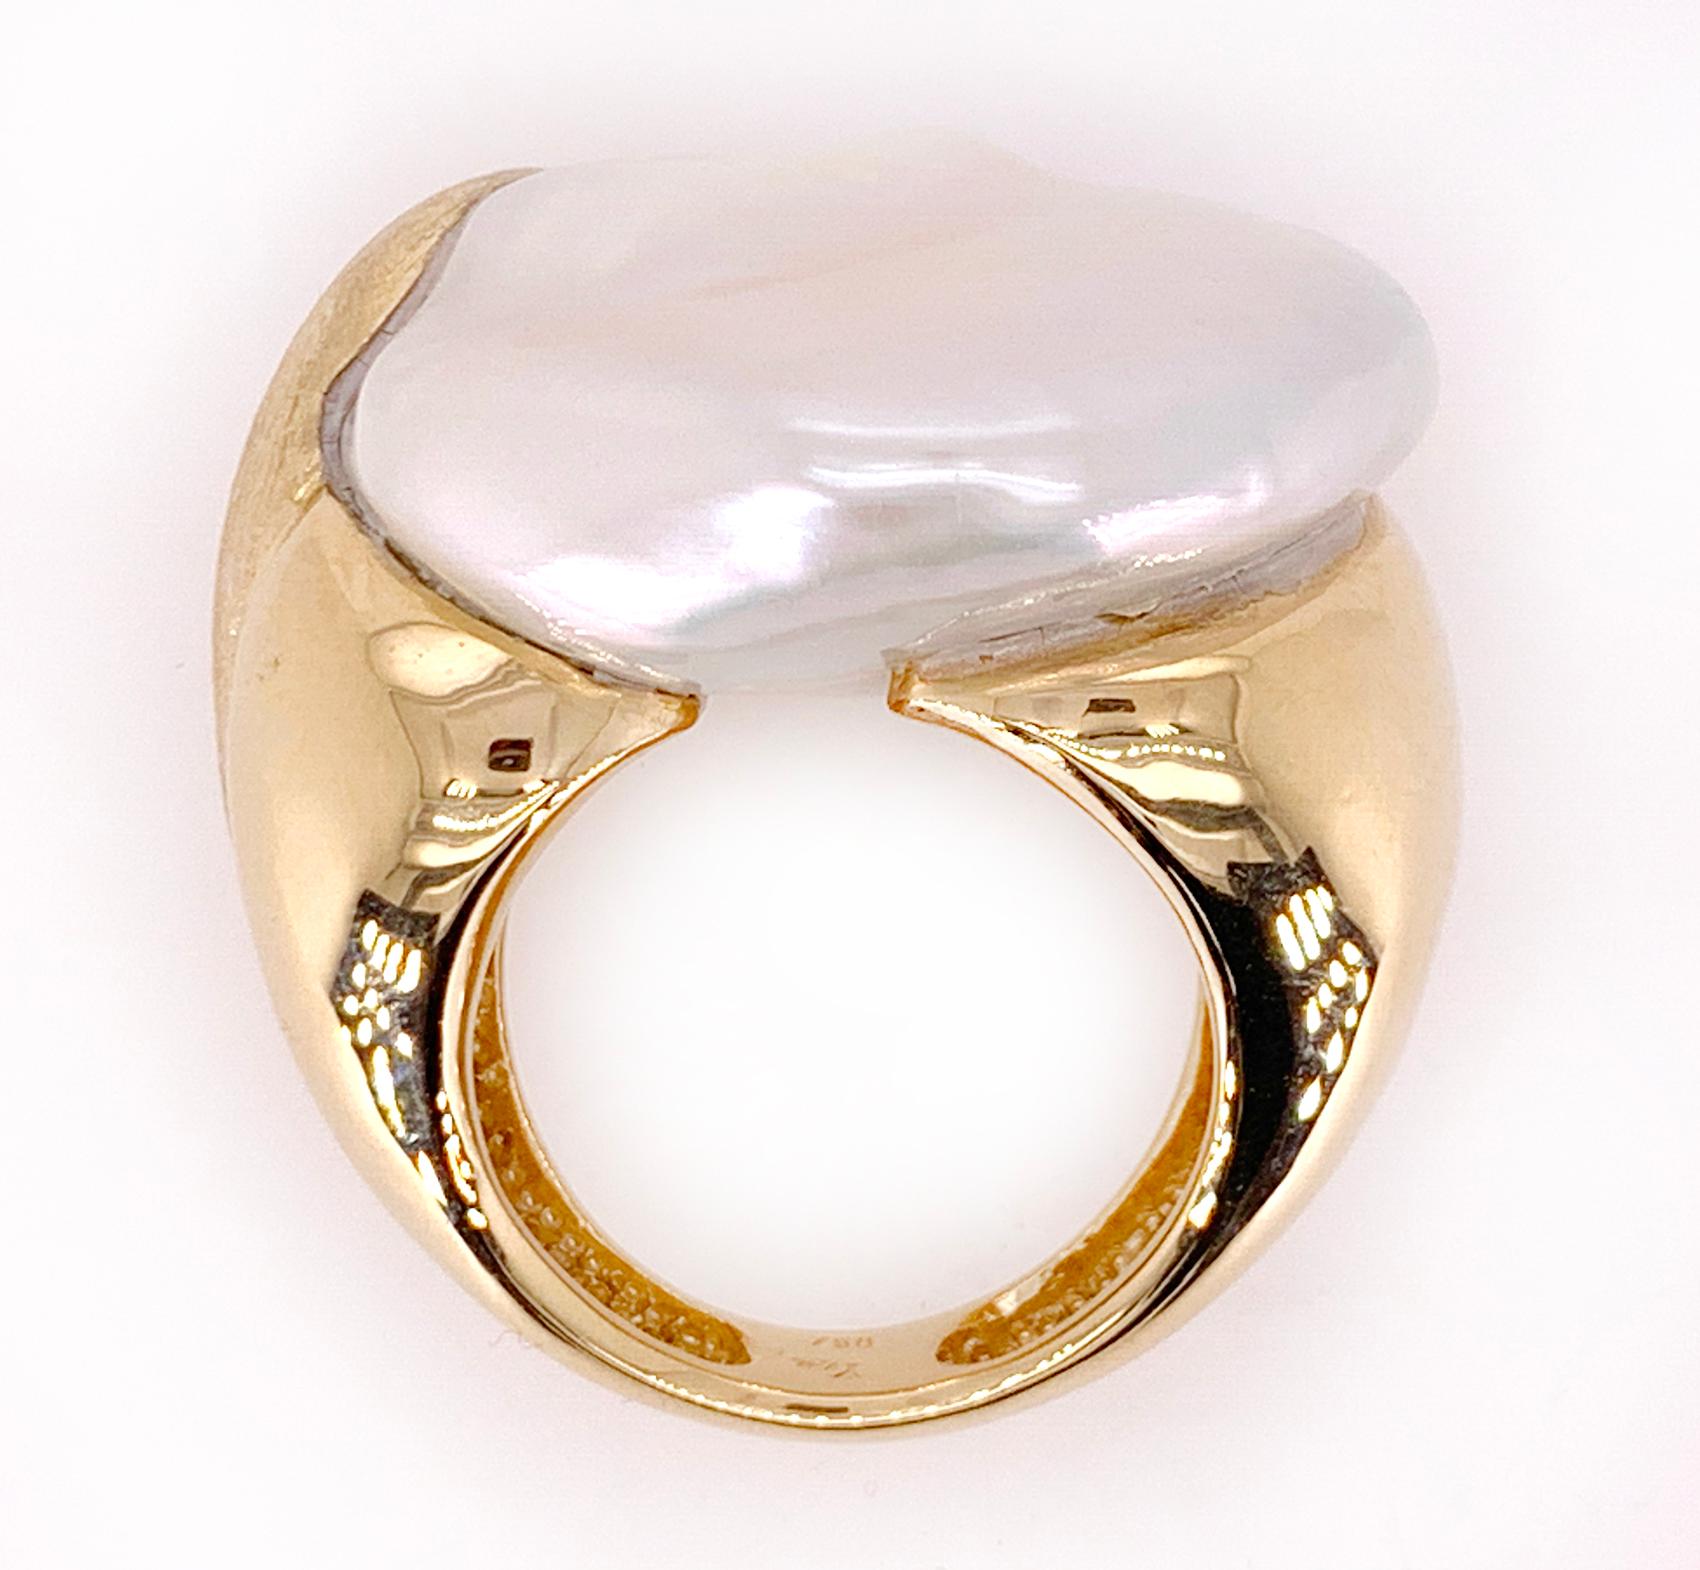 Yvel Satin Sea Baroque Pearl Ring In Excellent Condition For Sale In Carmel, CA